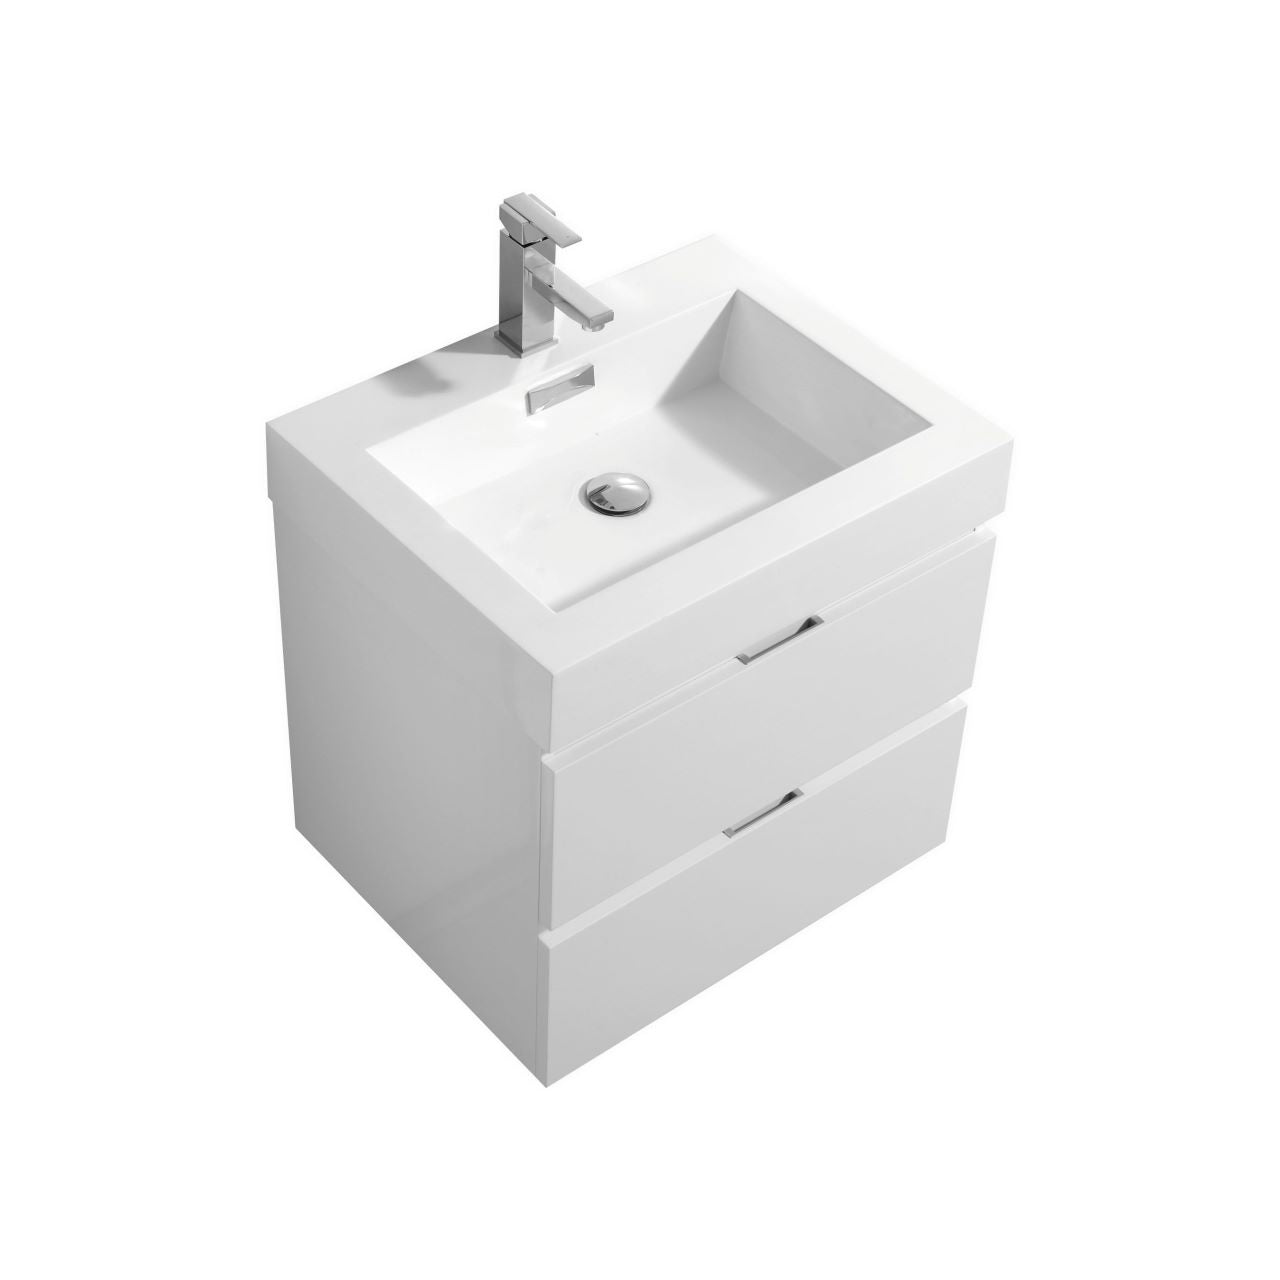 KUBEBATH Bliss BSL24-GW 24" Single Wall Mount Bathroom Vanity in High Gloss White with White Acrylic Composite, Integrated Sink, Angled View